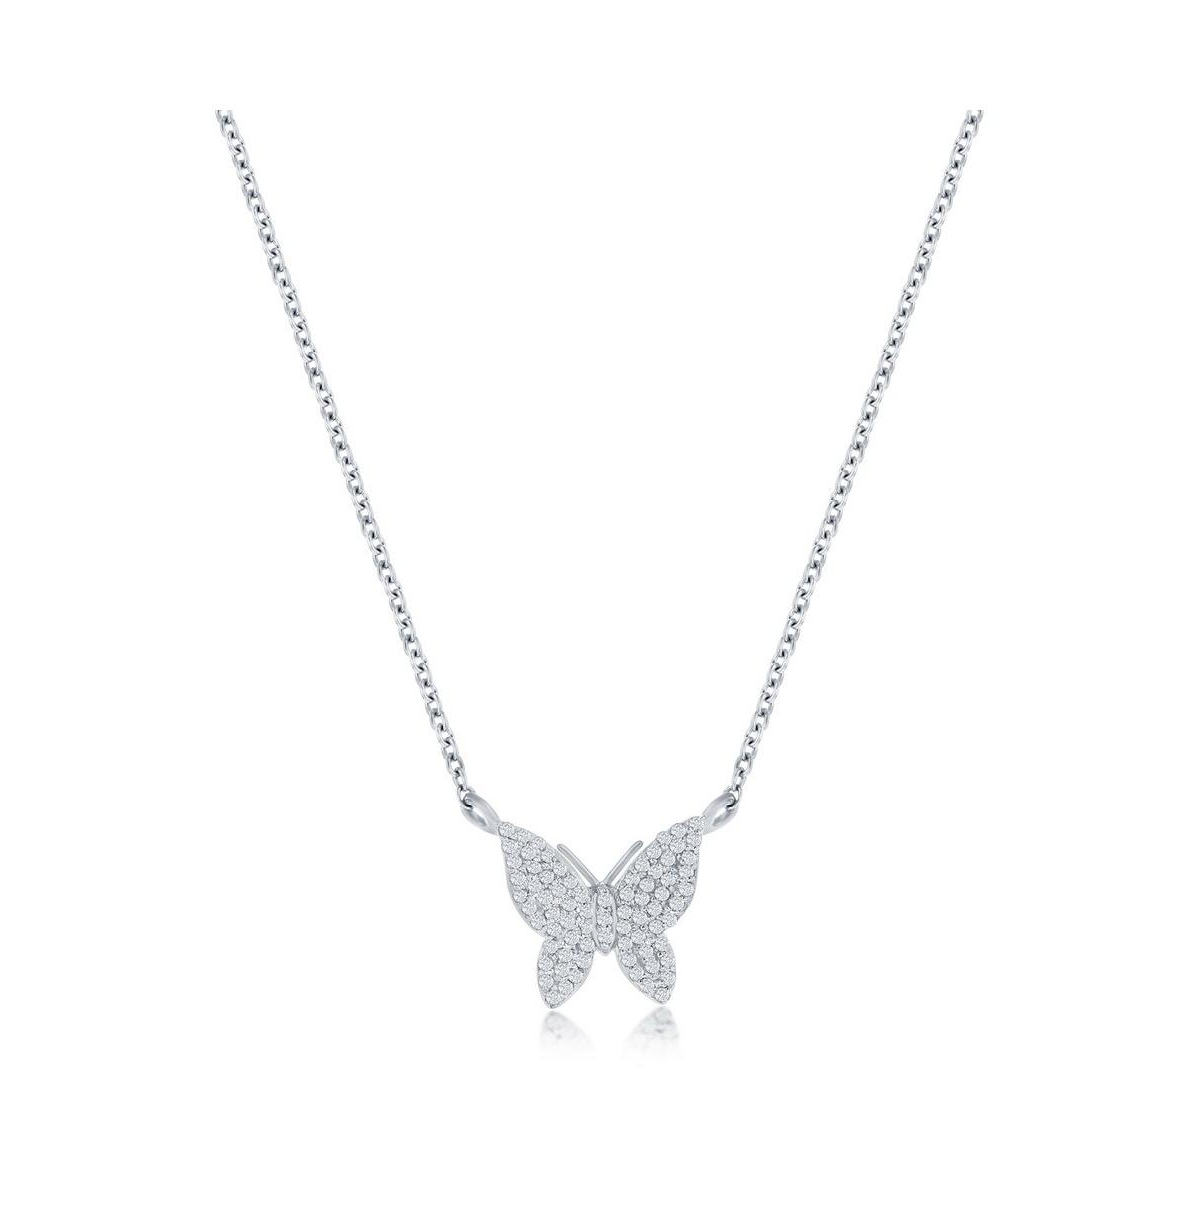 SIMONA BUTTERFLY DIAMOND NECKLACE (0.1 CT. T.W.) - 75 STONES IN STERLING SILVER